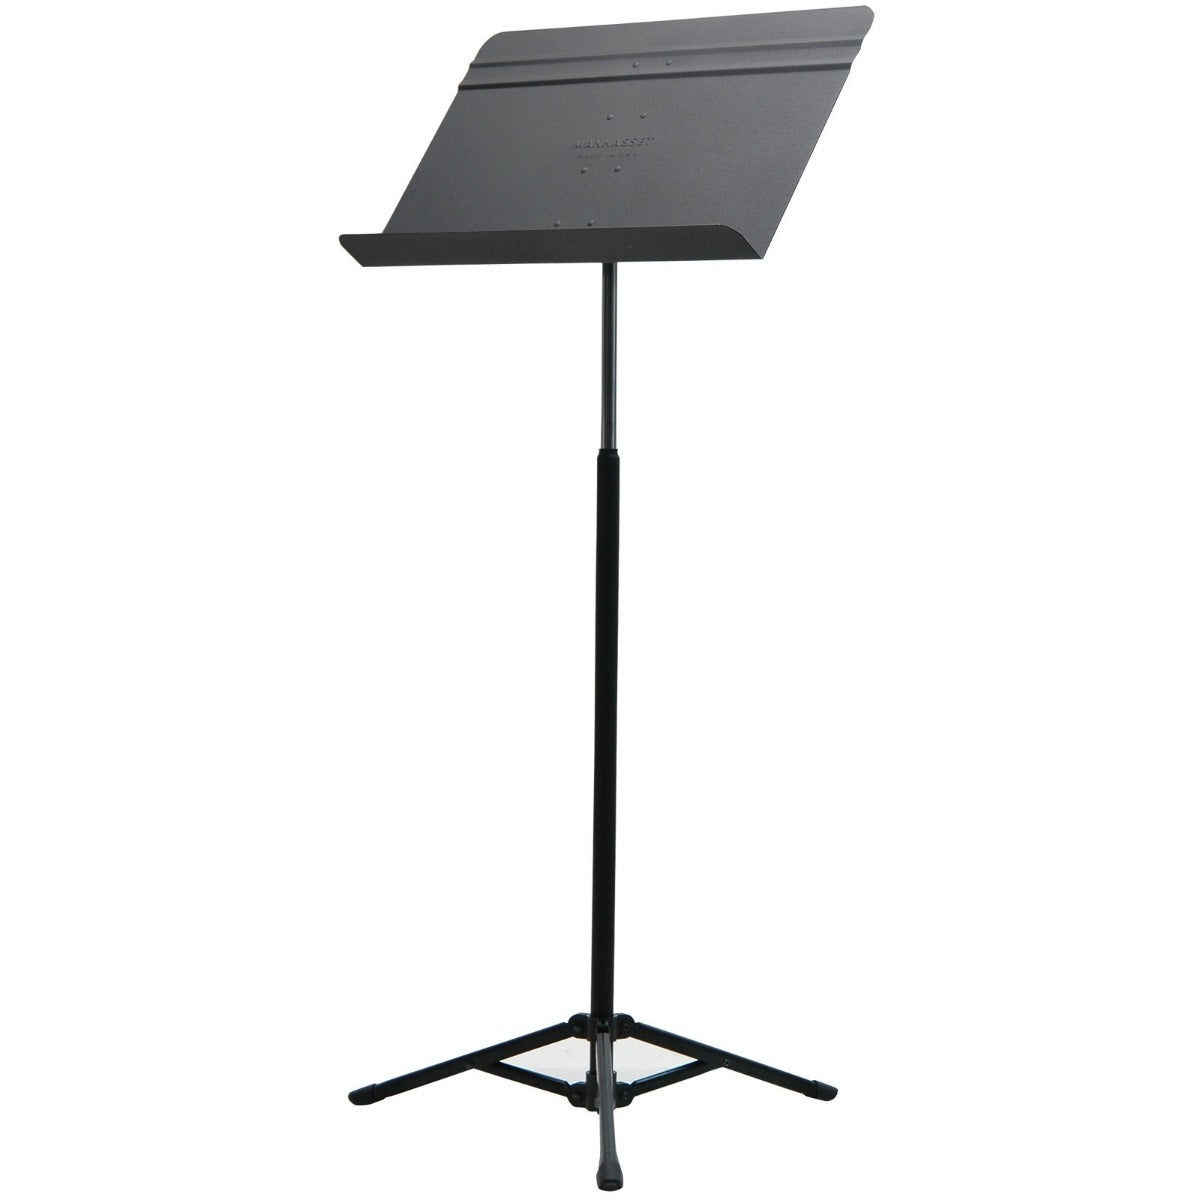 Manhasset Voyager Music stand with Tote Bag